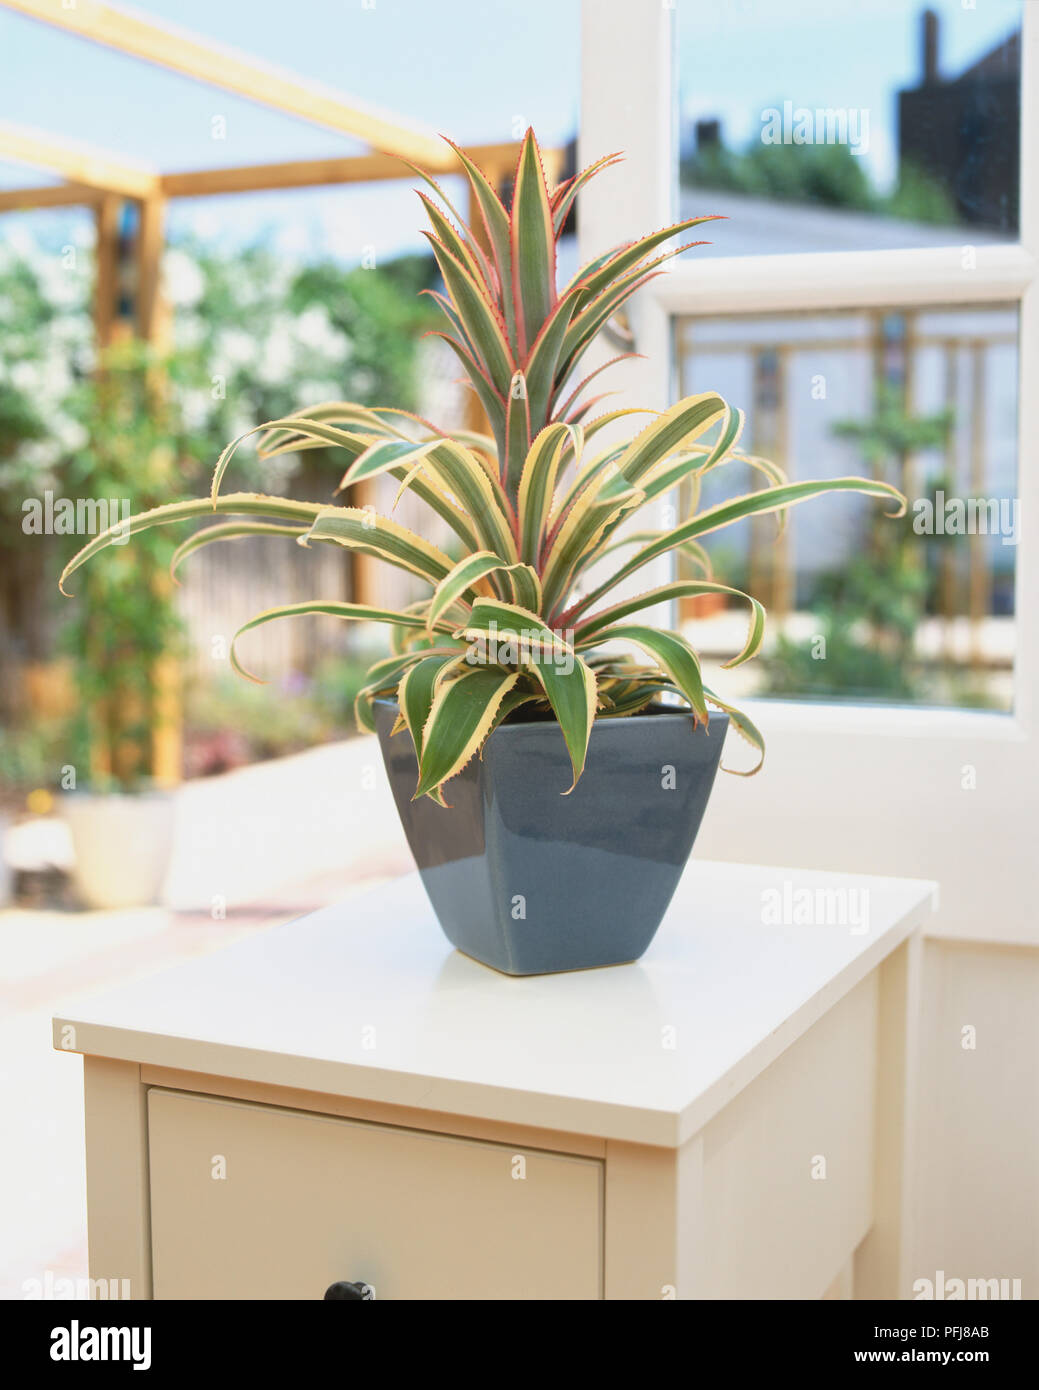 Ananas comosus var. variegatus, Pineapple plant growing in blue ceramic pot by window looking out to garden. Stock Photo